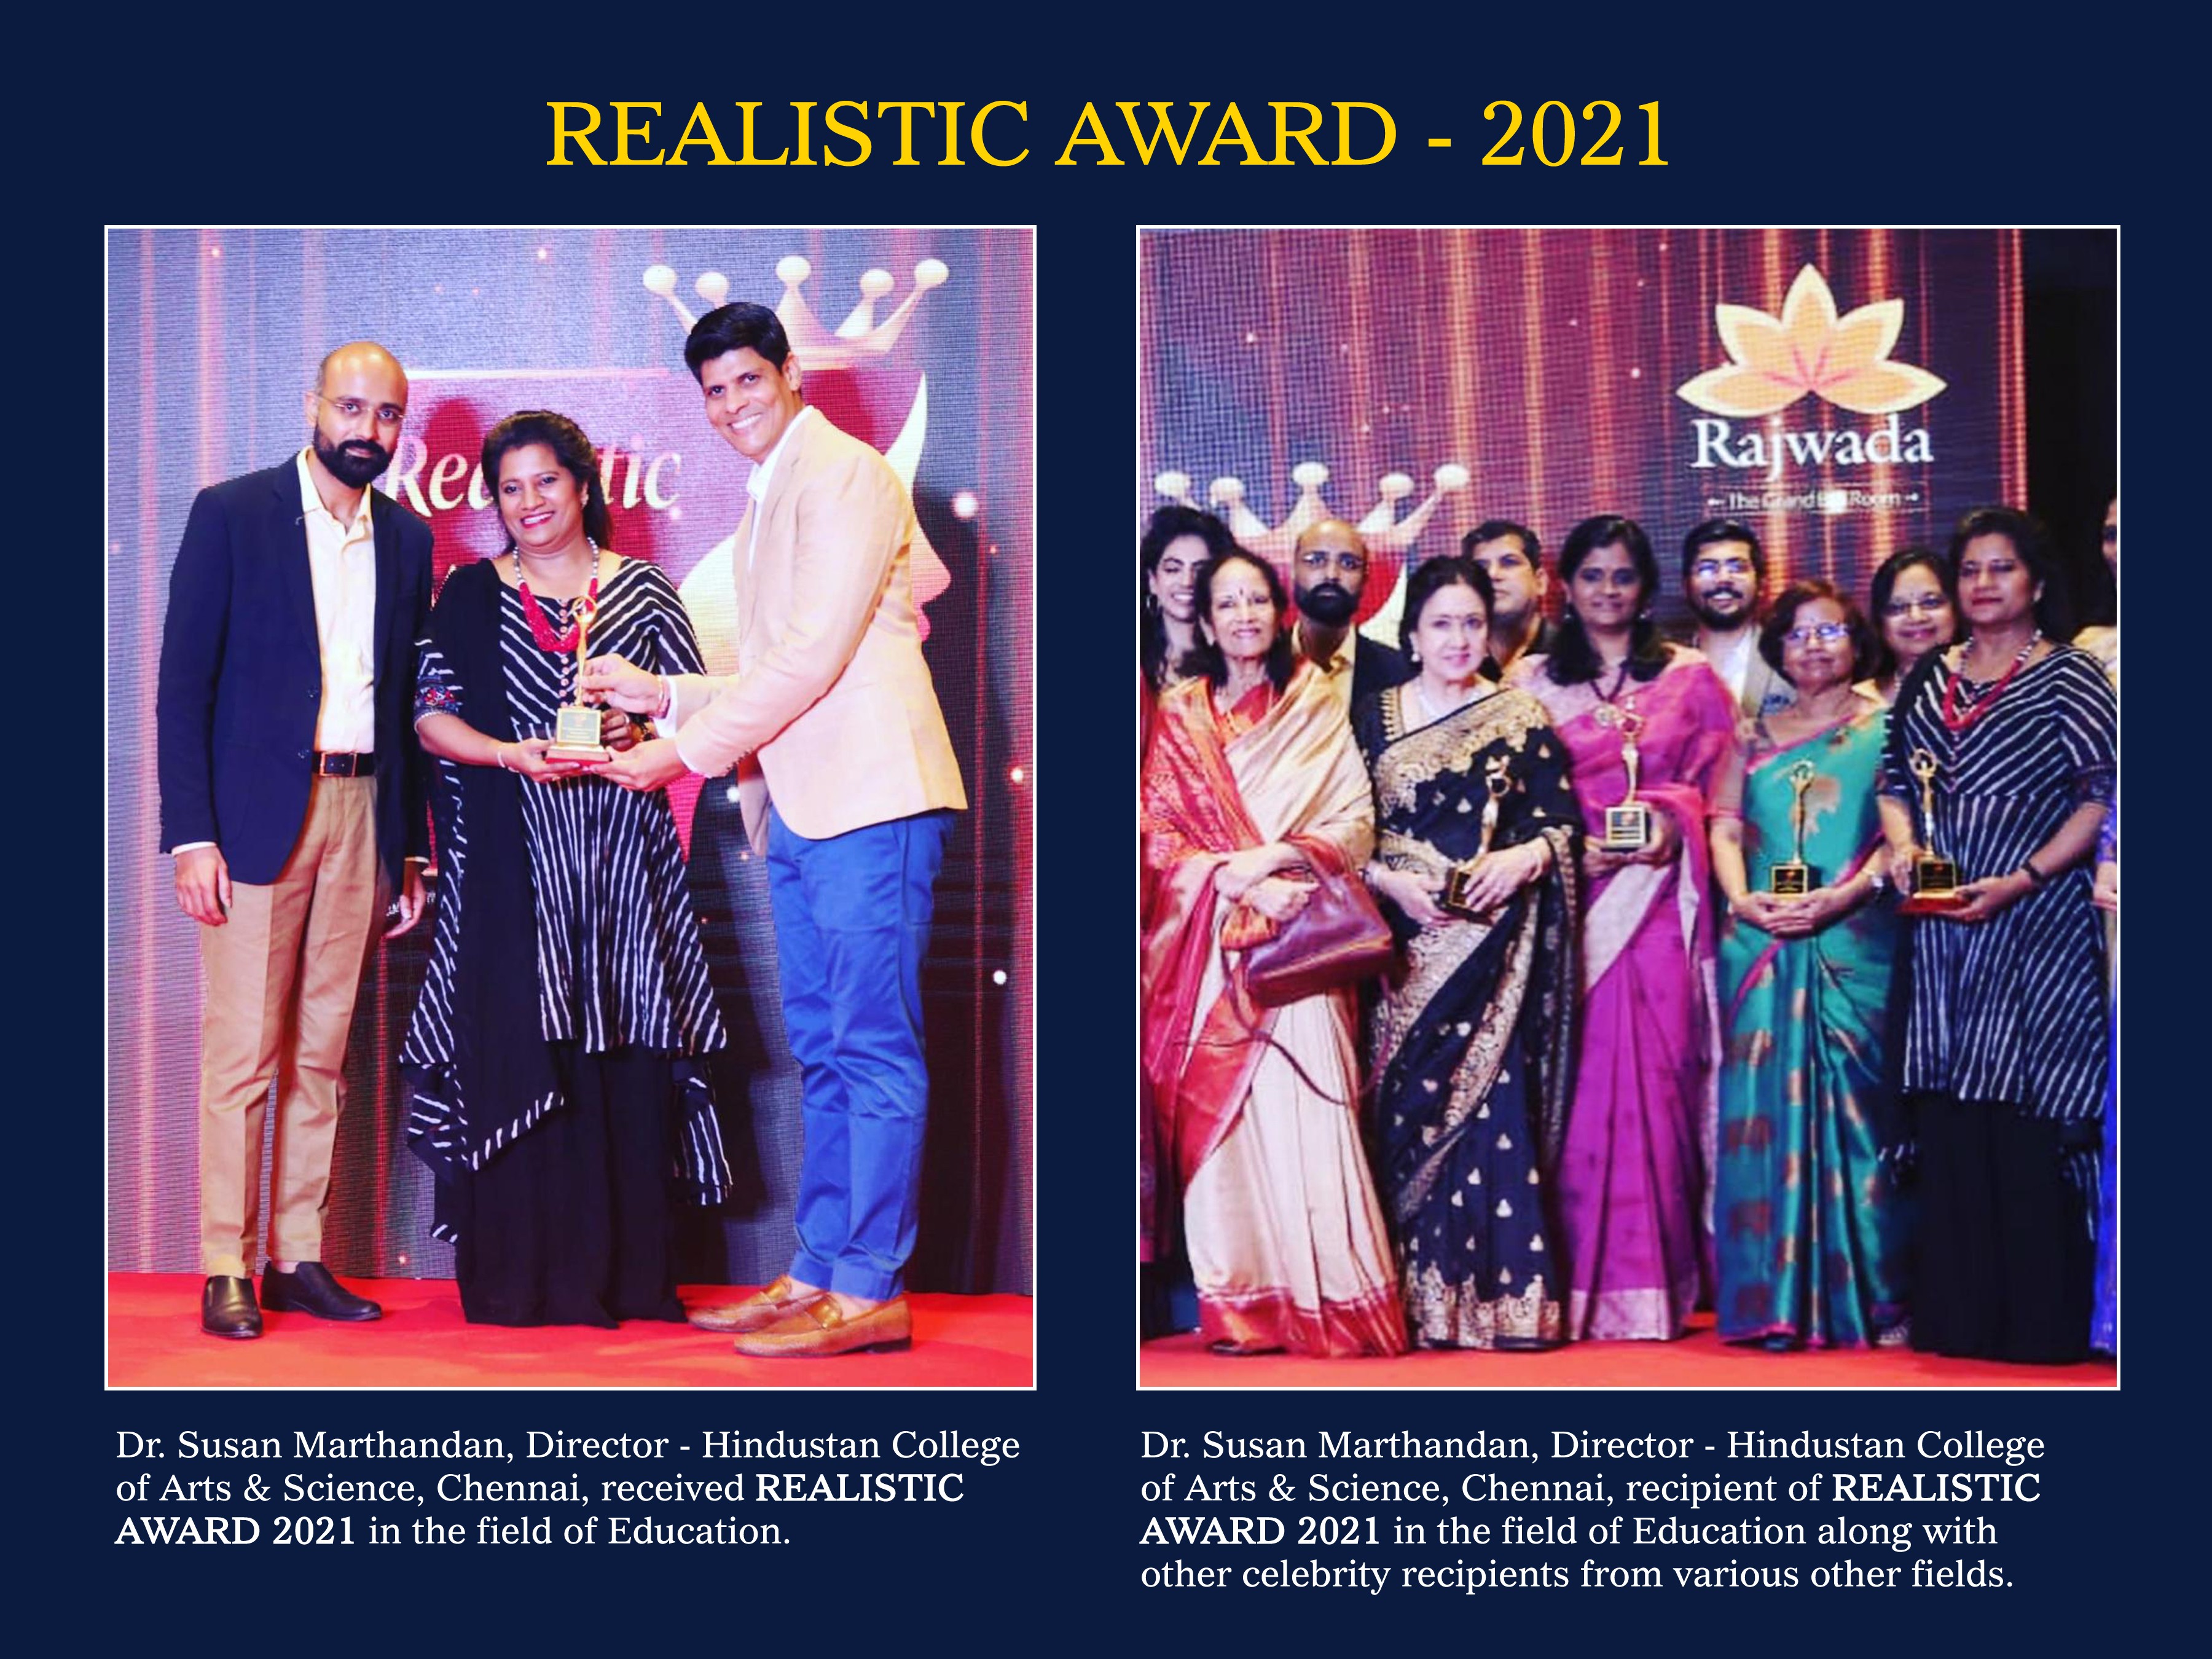 Dr. Susan Marthandan, Director - HCAS, Chennai. received REALISTIC AWARD 2021 in the field of Education.